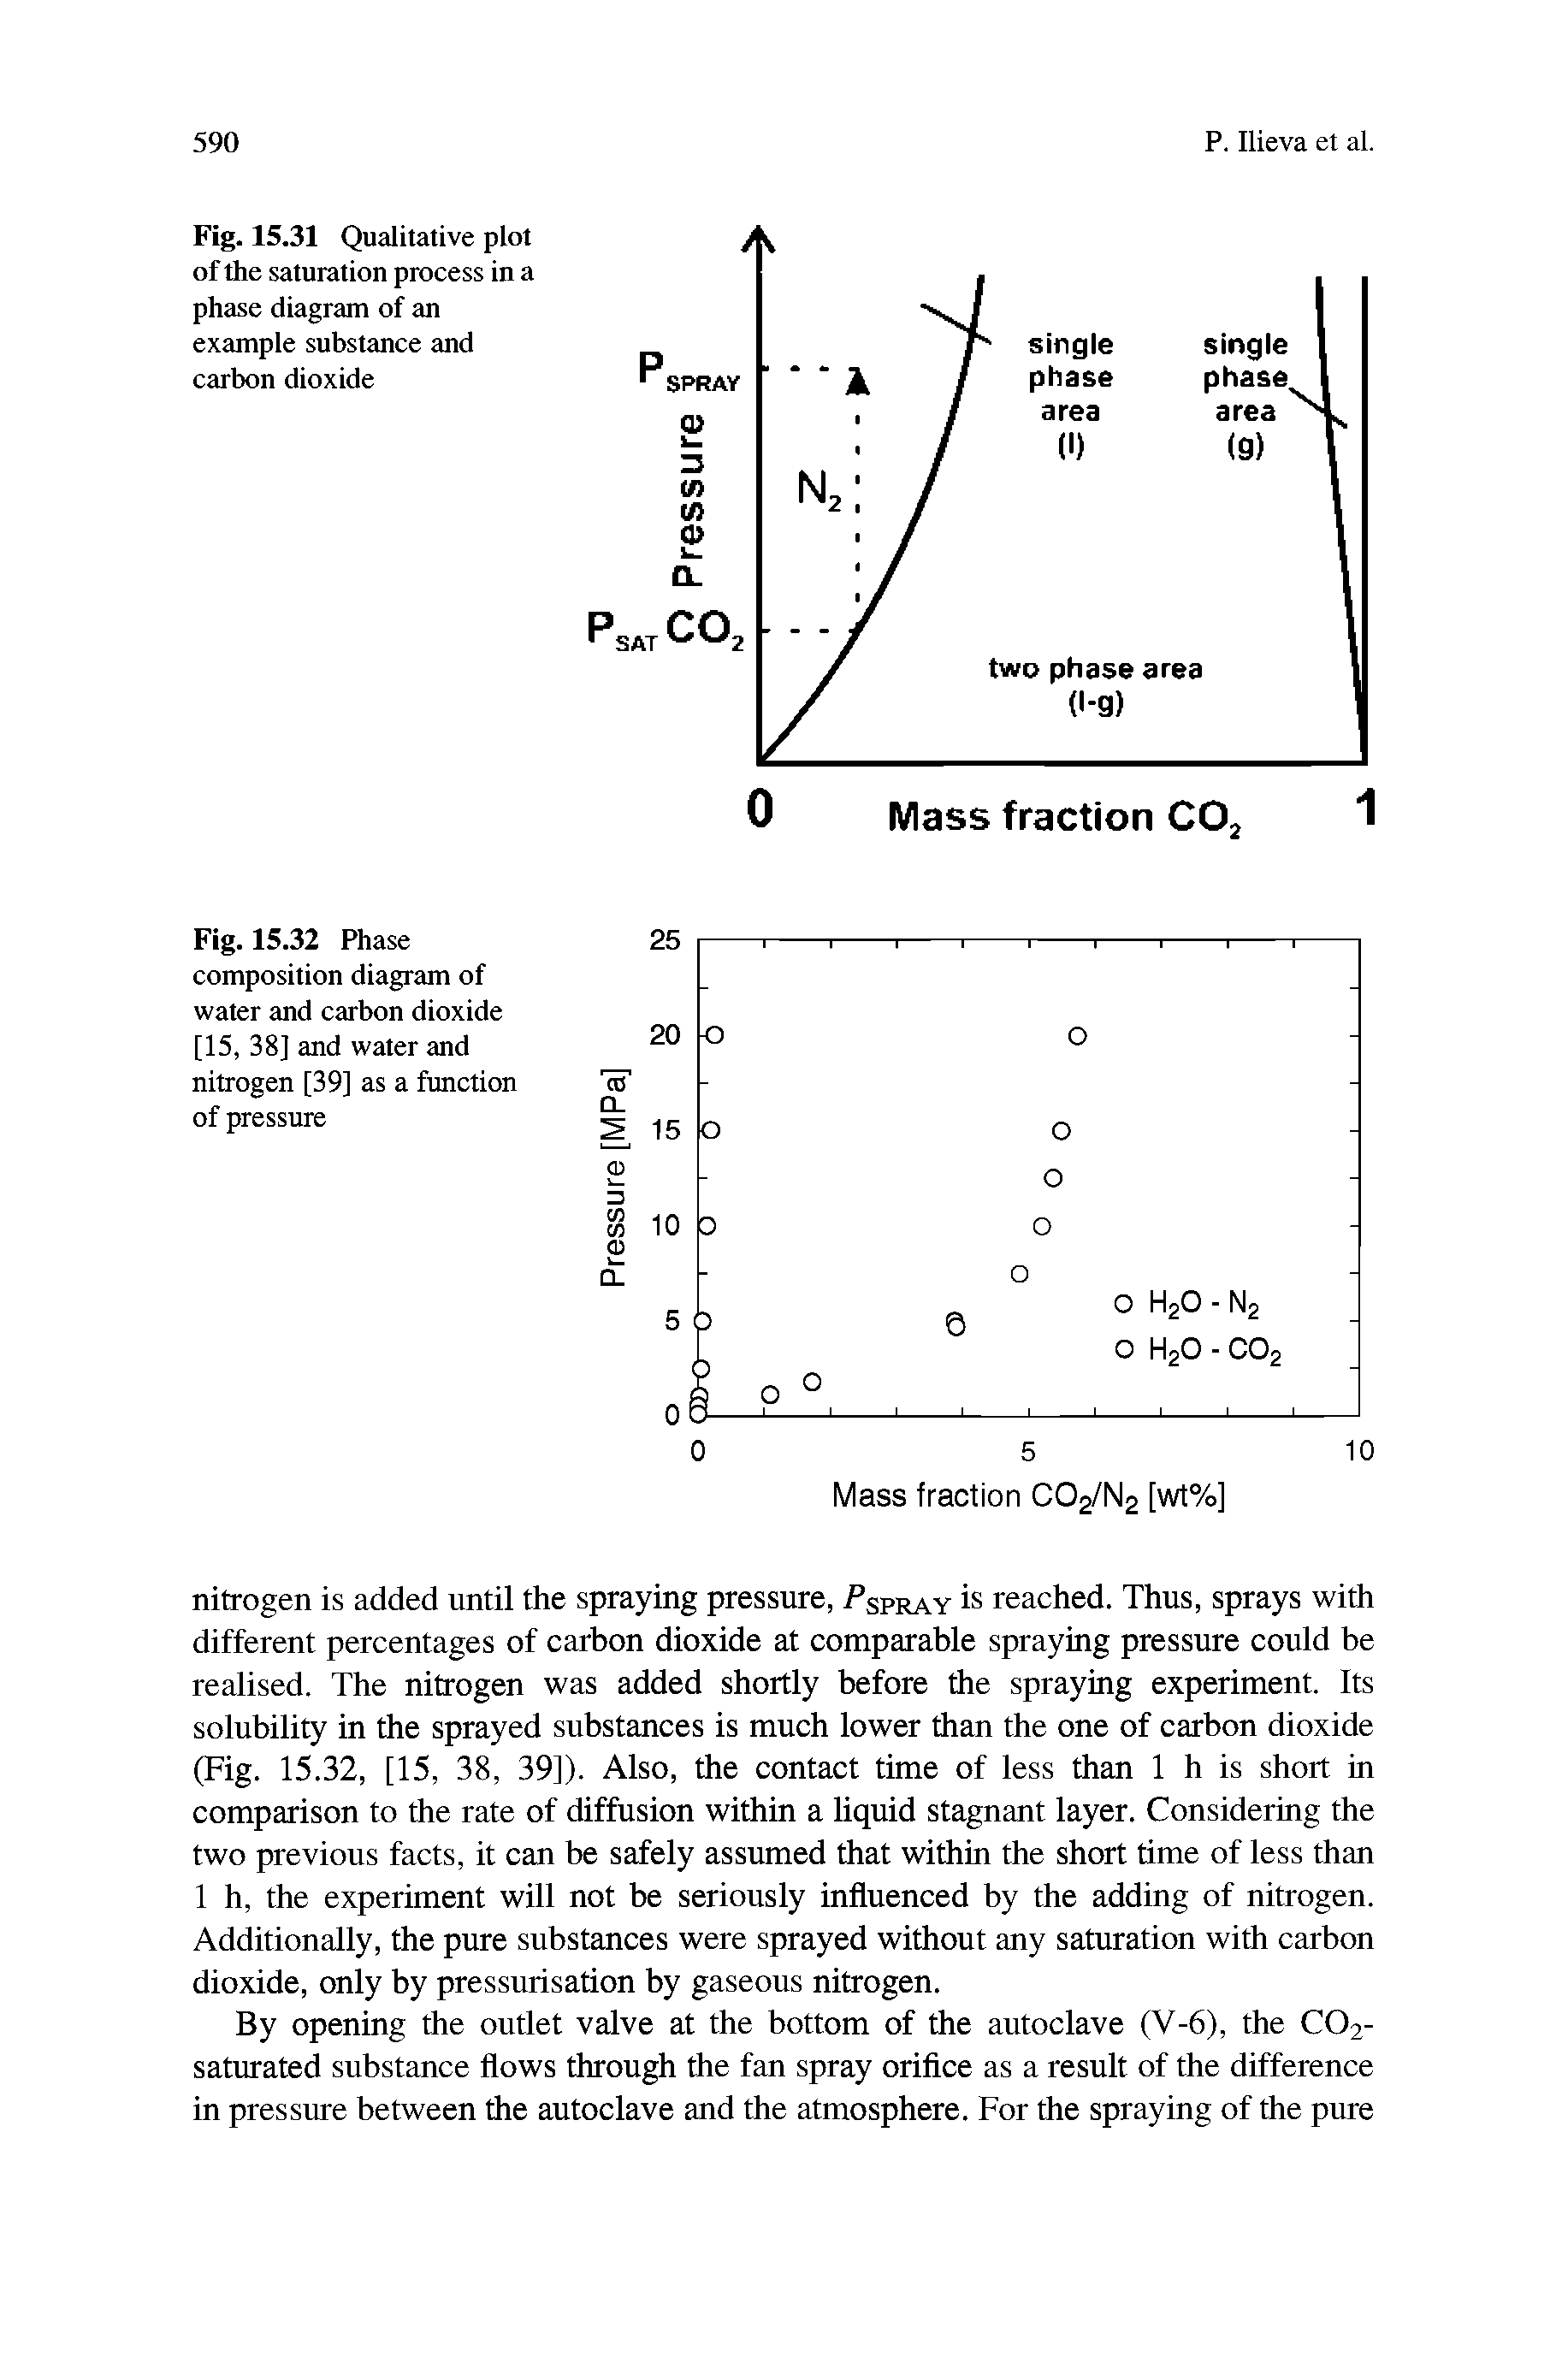 Fig. 15.32 Phase composition diagram of water and carbon dioxide [15, 38] and water and nitrogen [39] as a function of pressure...